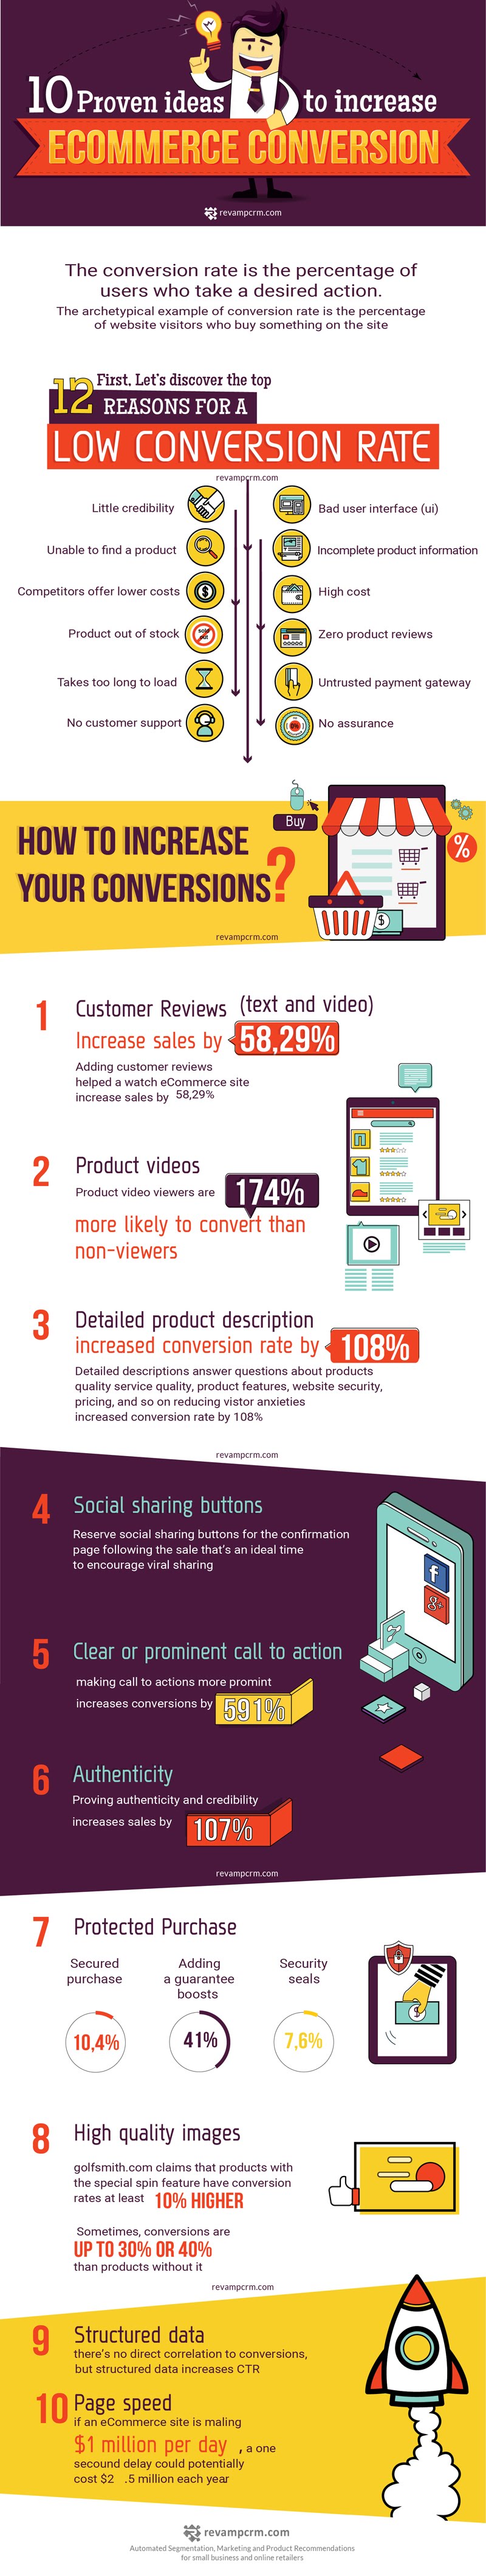 10 Proven Ideas to Increase eCommerce Conversions - #Infographic